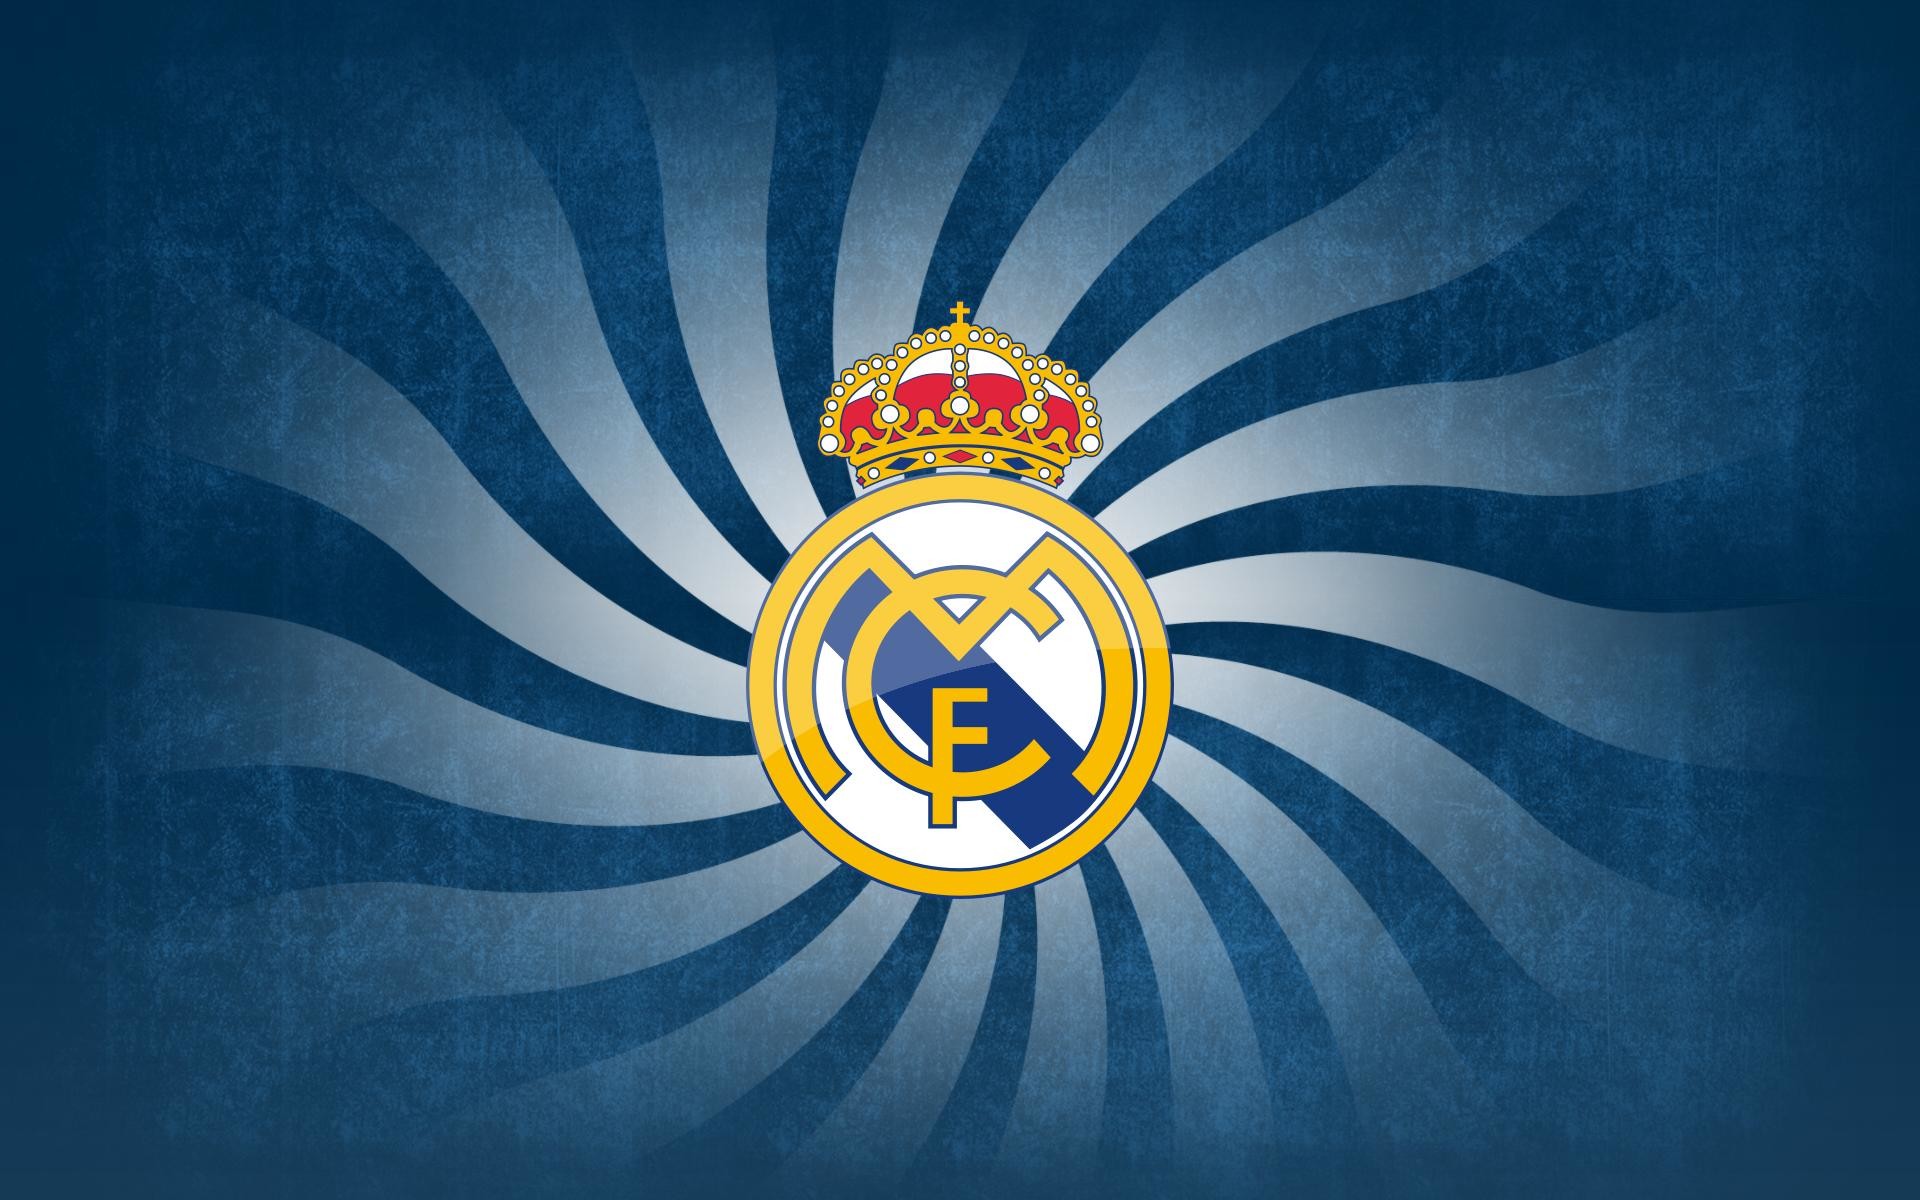 Marcelo photos and wallpapers 2018. This is a logo owned by Real Madrid Club de Ftbol for Real Madrid C.F.. The logo